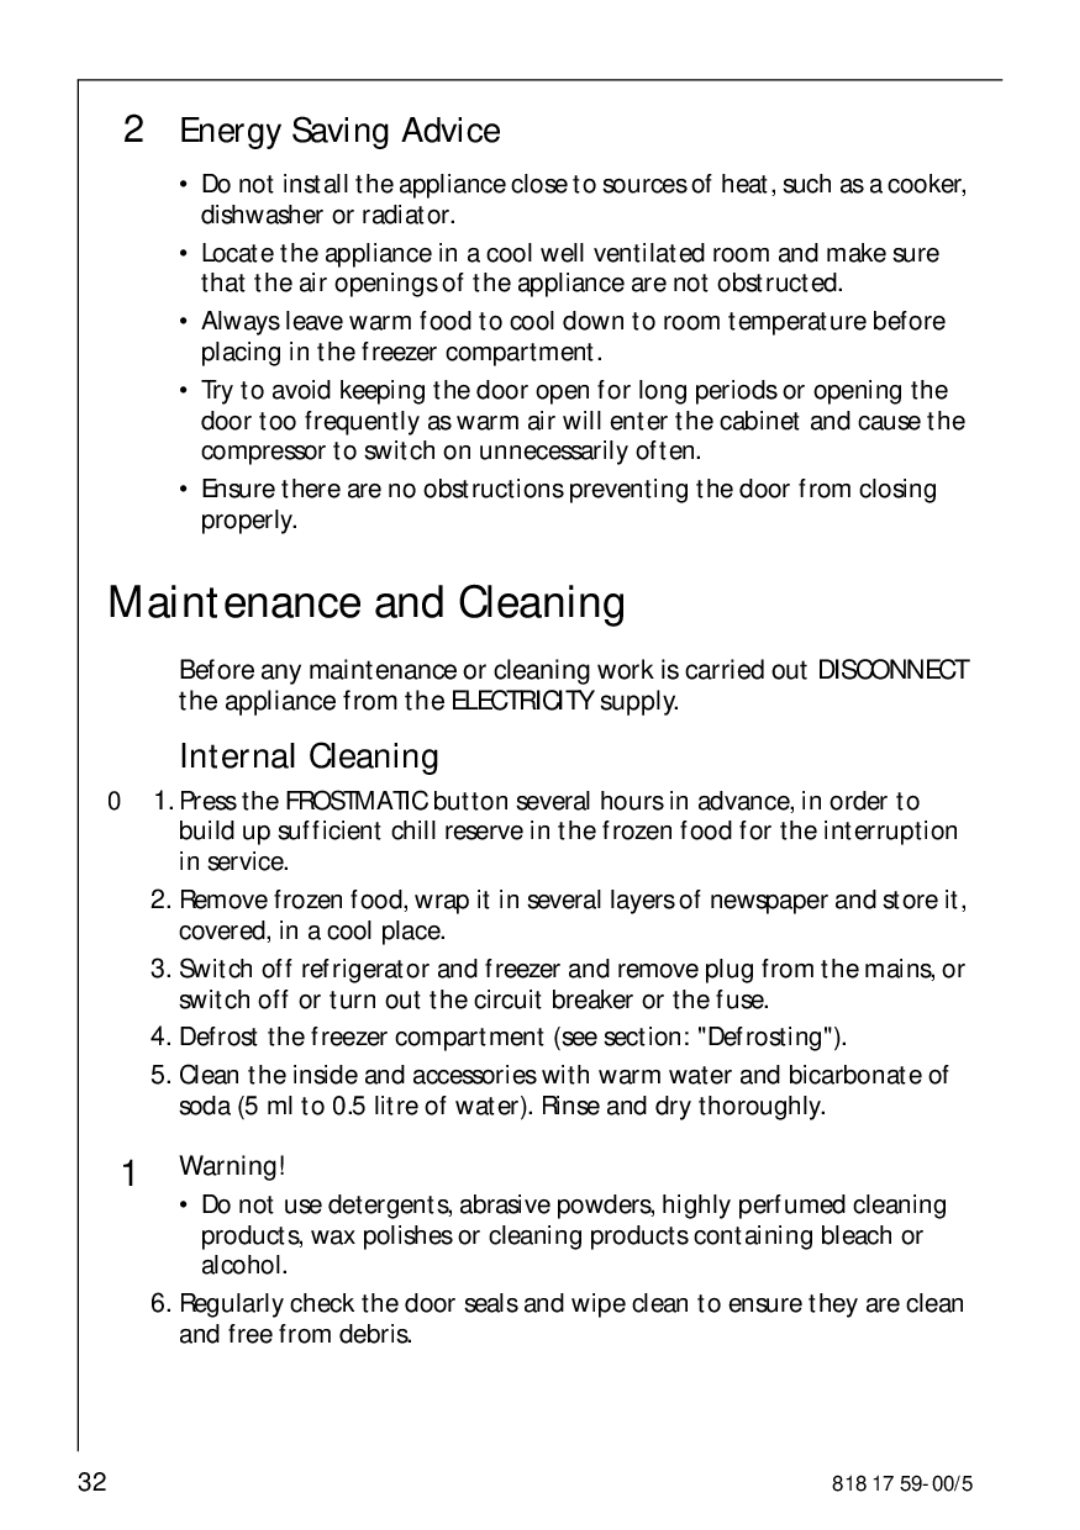 AEG 3150-7 KG manual Maintenance and Cleaning, Energy Saving Advice, Internal Cleaning 